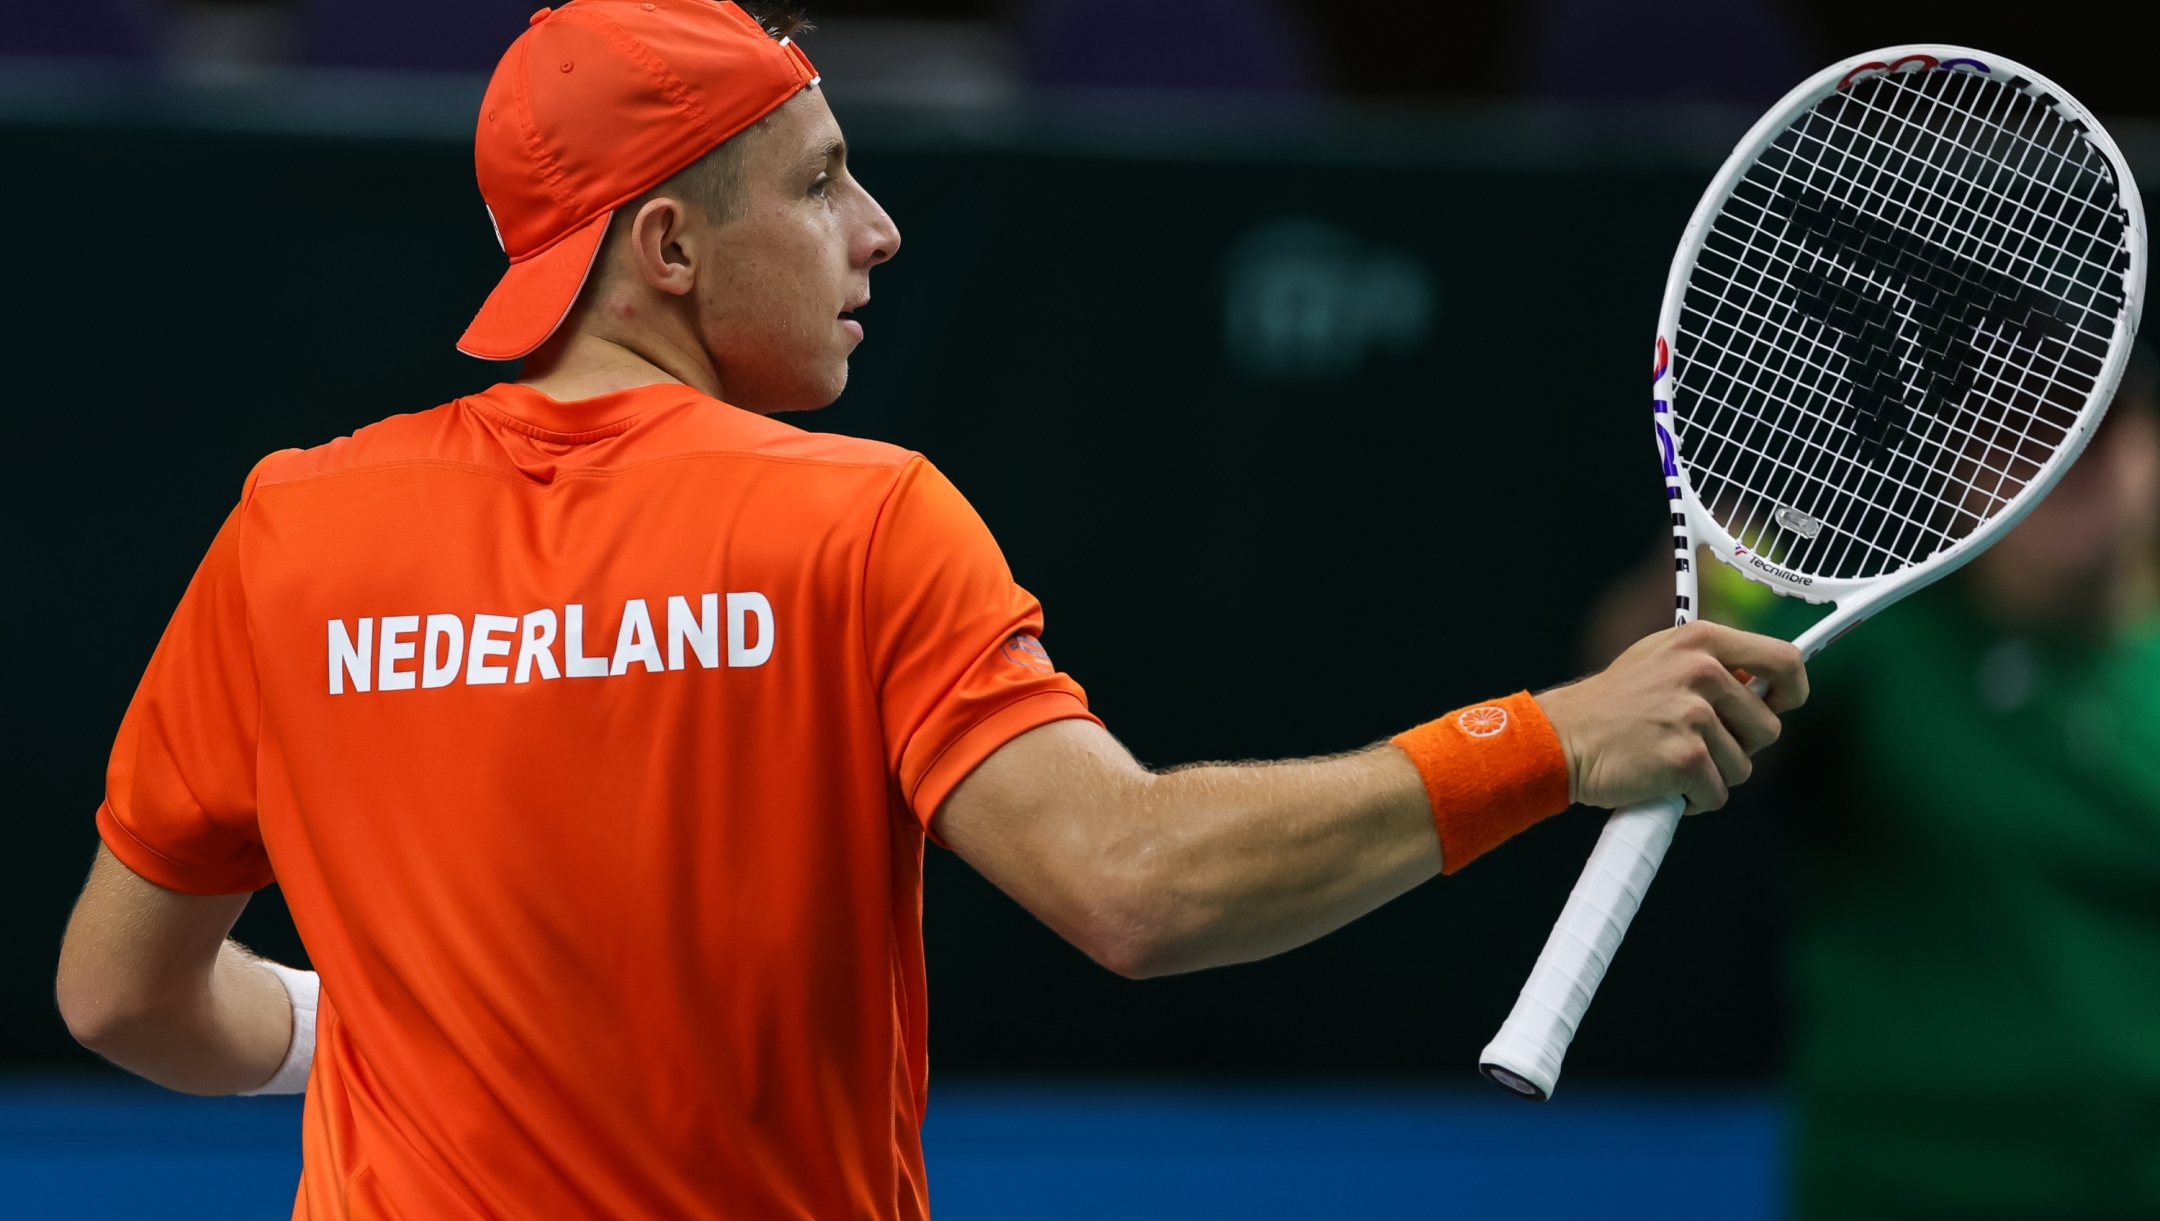 SPLIT, CROATIA - SEPTEMBER 17: Tallon Griekspoor of Netherlands reacts during his match against Borna Gojo of Croatia on the 2023 Davis Cup Finals Group Stage Group D match between Croatia and Netherlands at Arena Gripe Sports Centre on September 17, 2023 in Split, Croatia. (Photo by Srdjan Stevanovic/Getty Images for ITF)